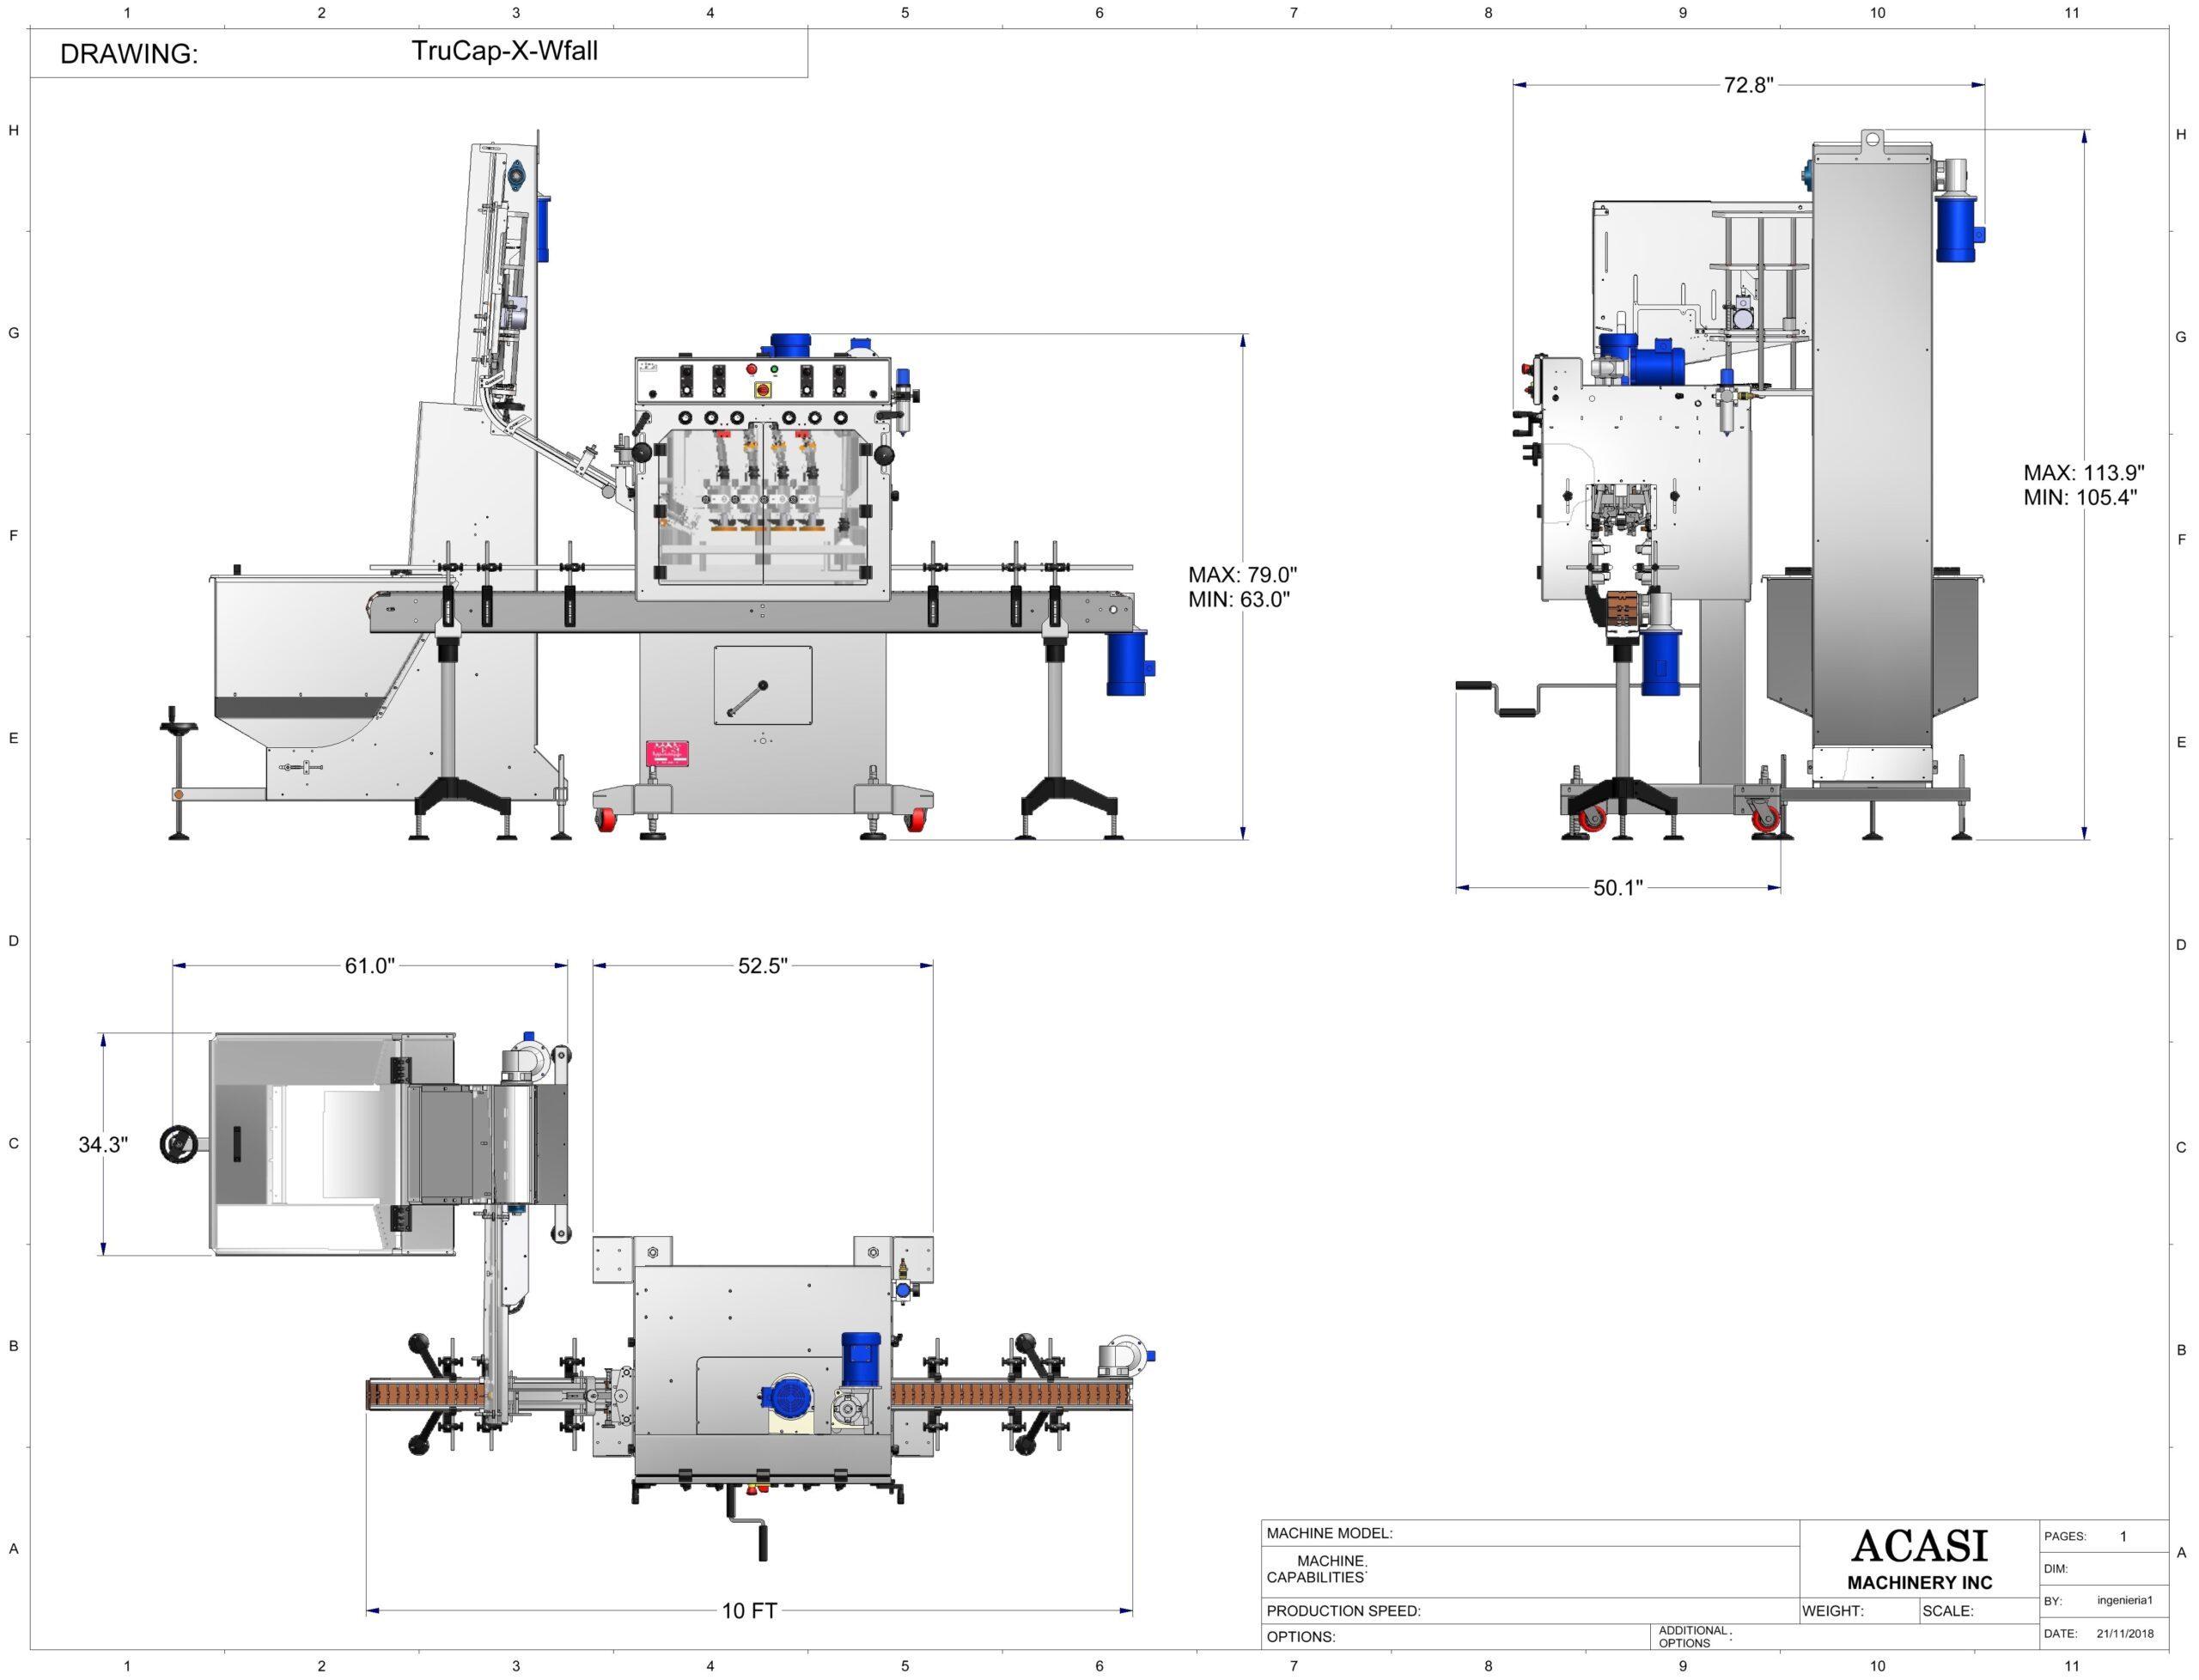 Automatic inline bottle capping machine, model TruCap-X-WFall dimensions, by Acasi Machinery Inc.